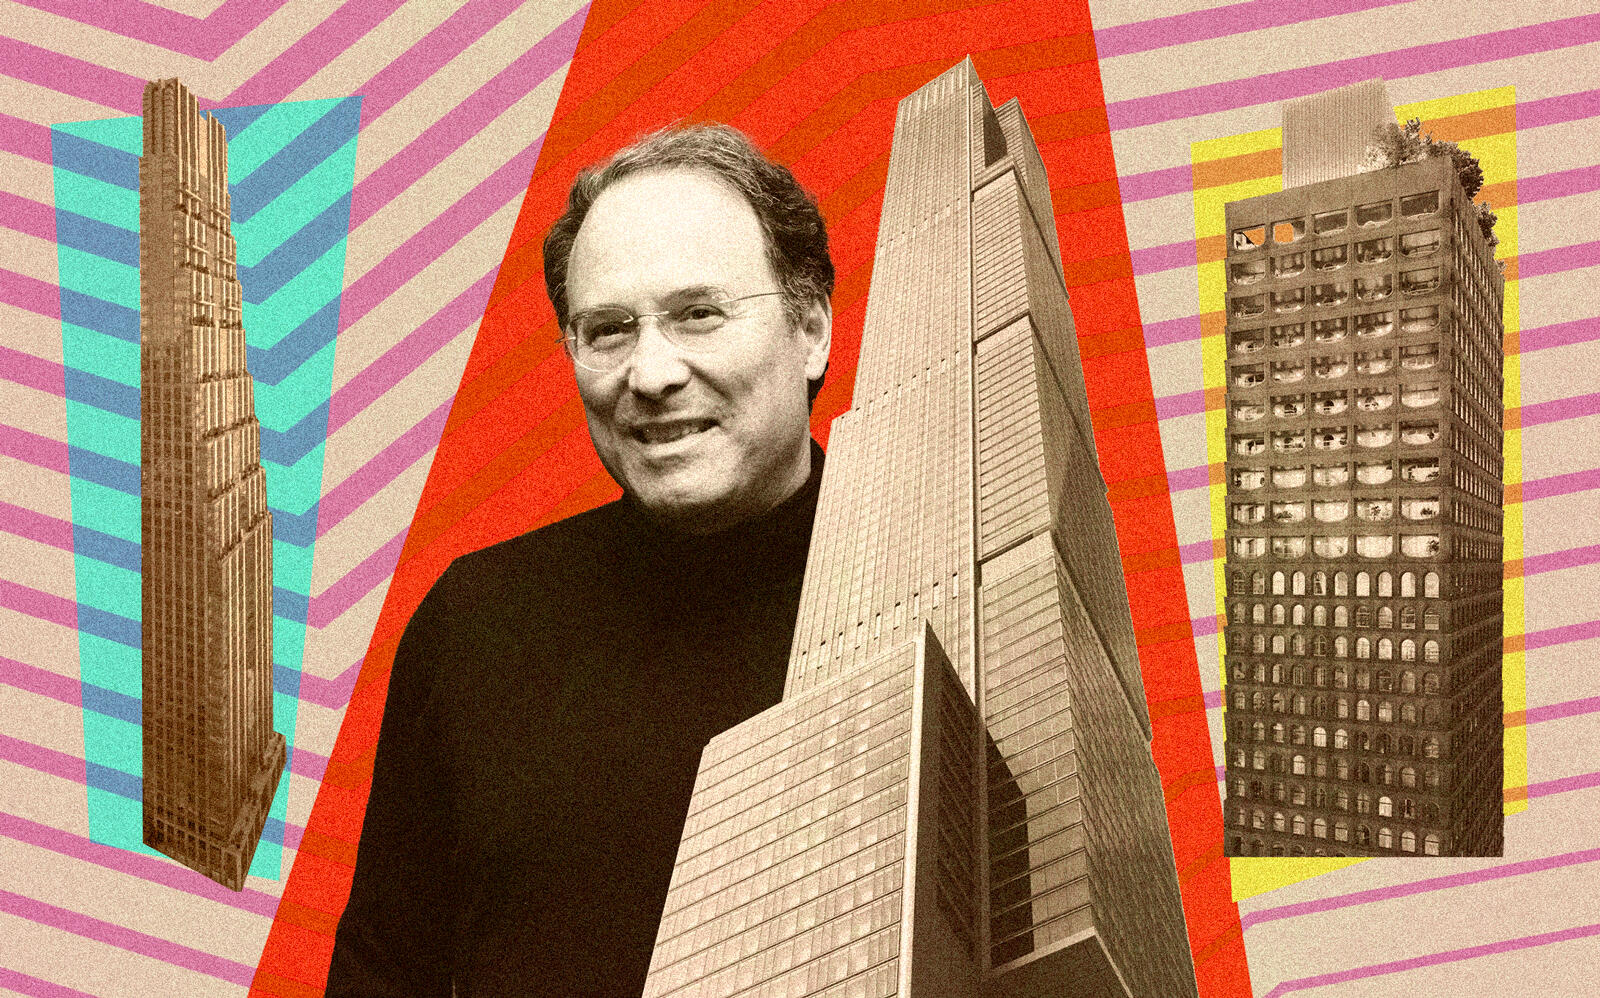 From left: 200 Amsterdam, Extell's Gary Barnett with Central Park Tower and 130 William Street 